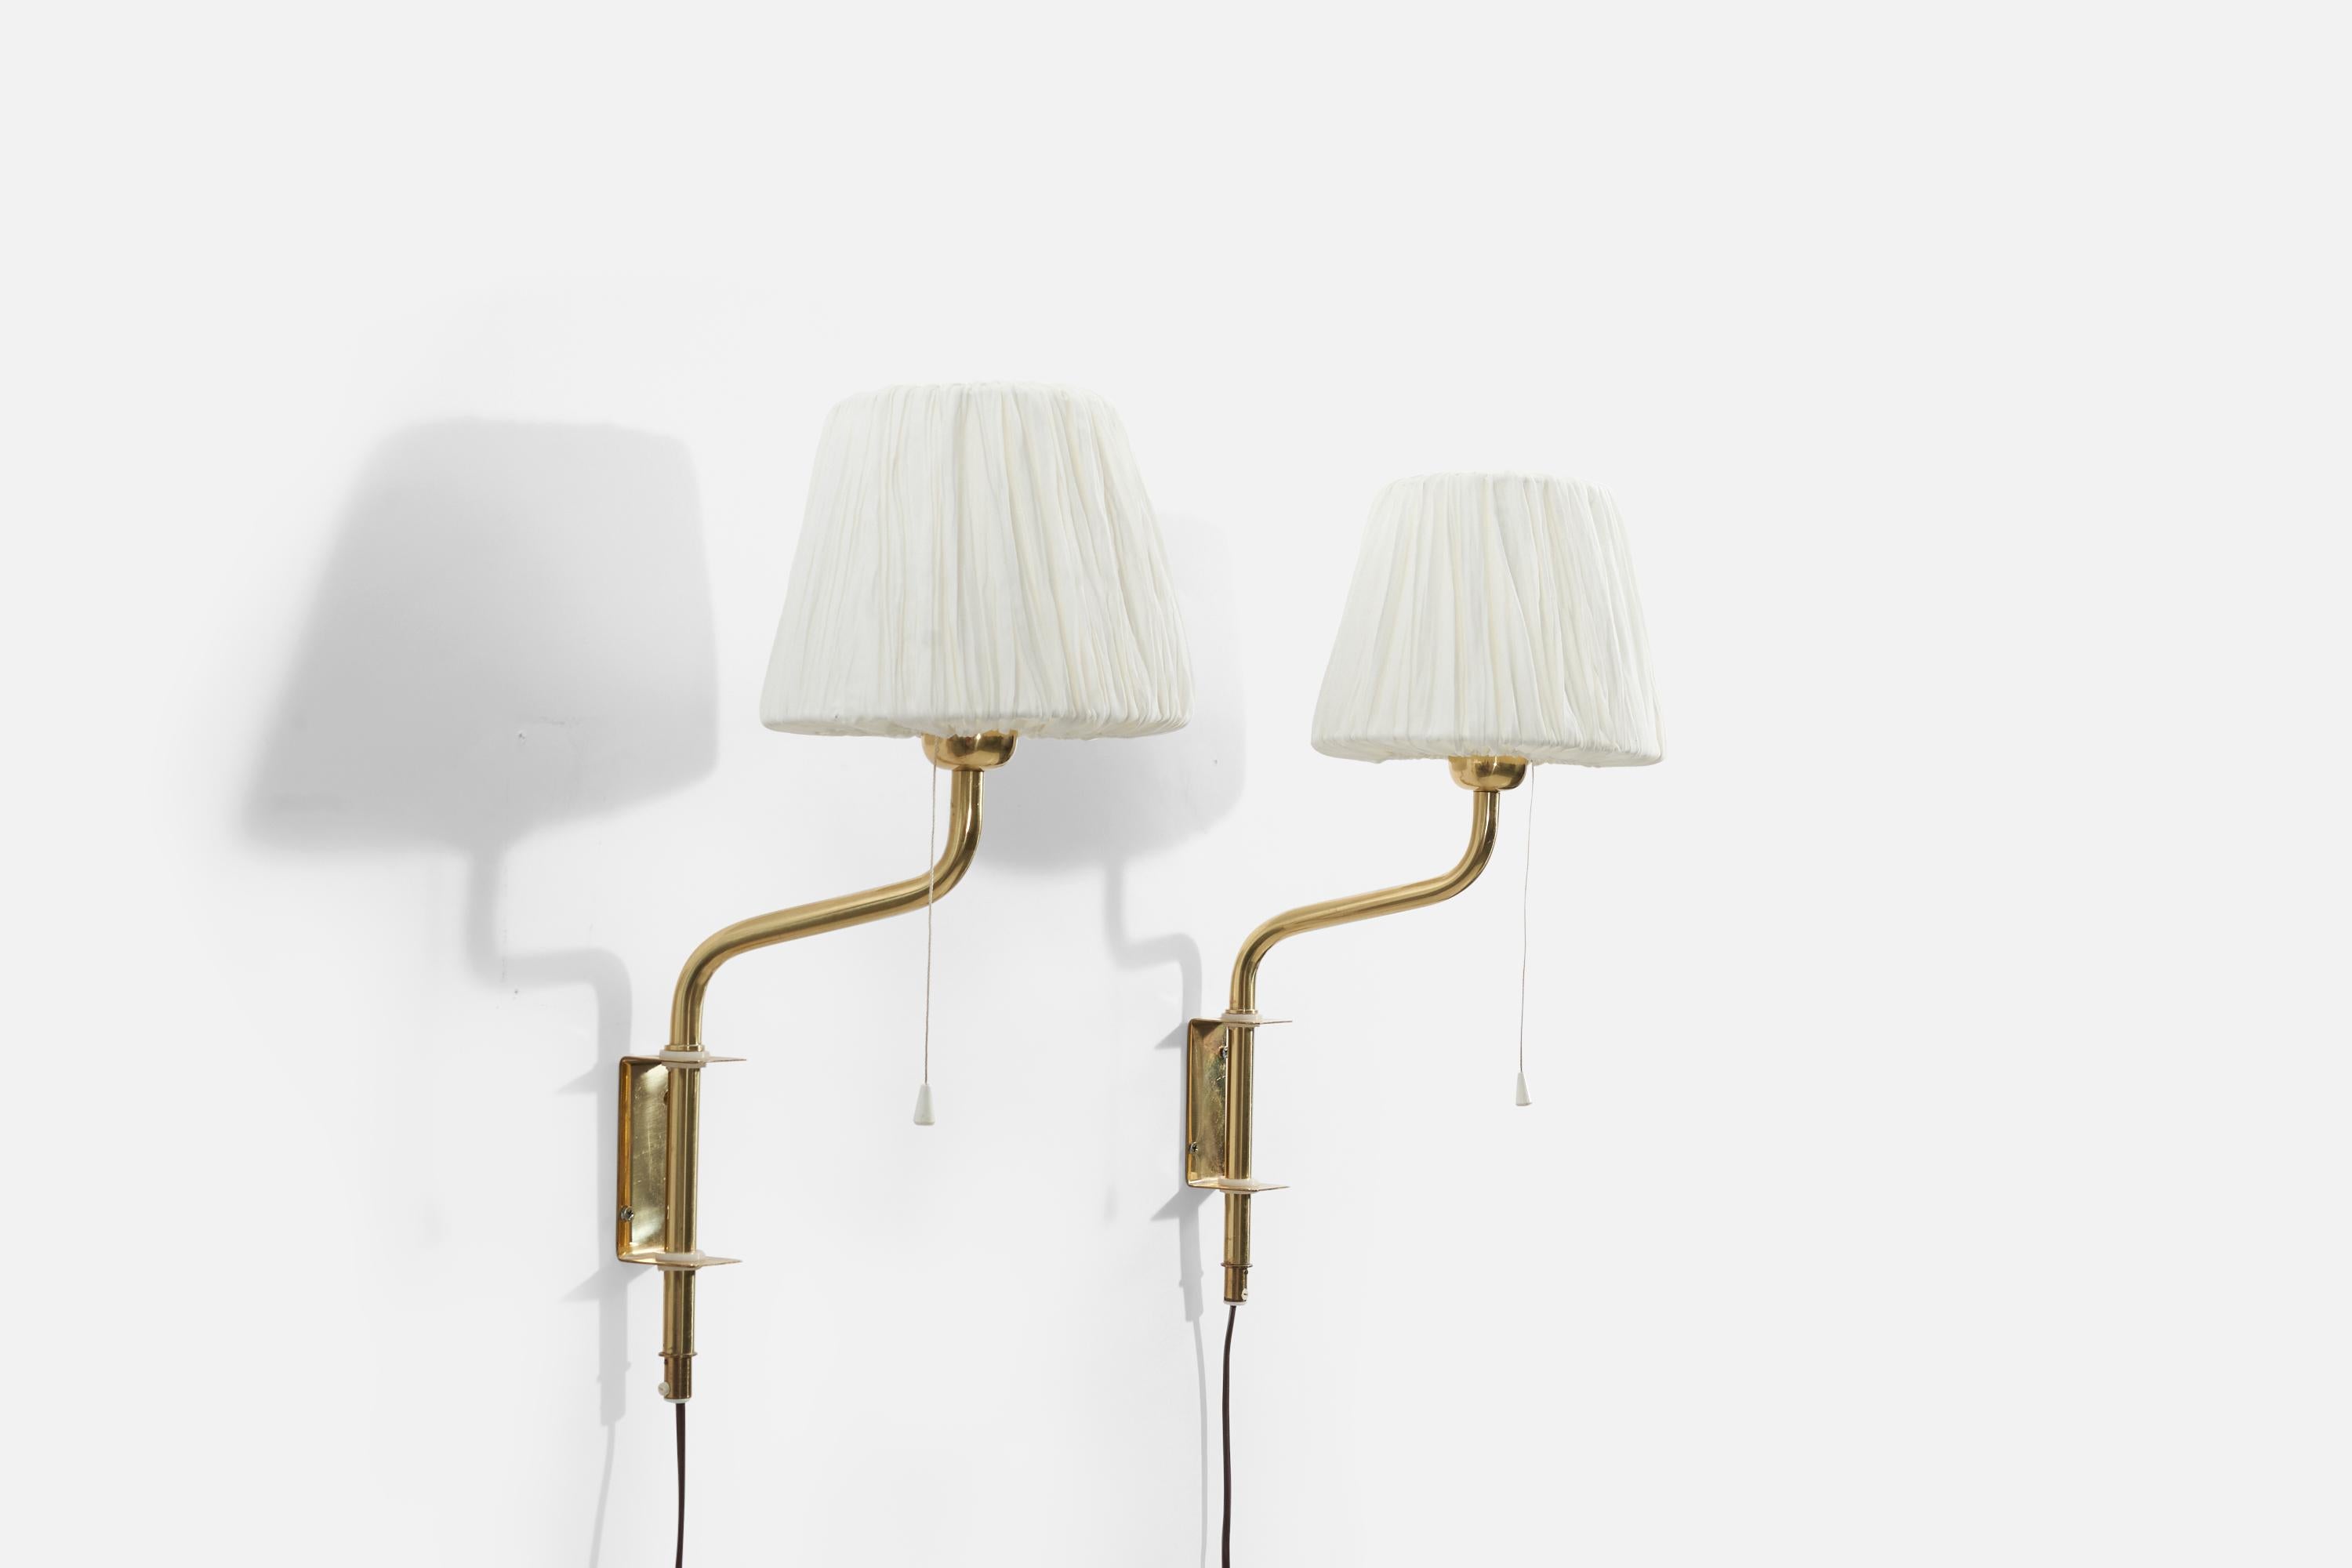 A pair of brass adjustable wall lights with fabric lampshades produced in Sweden, 1960s.